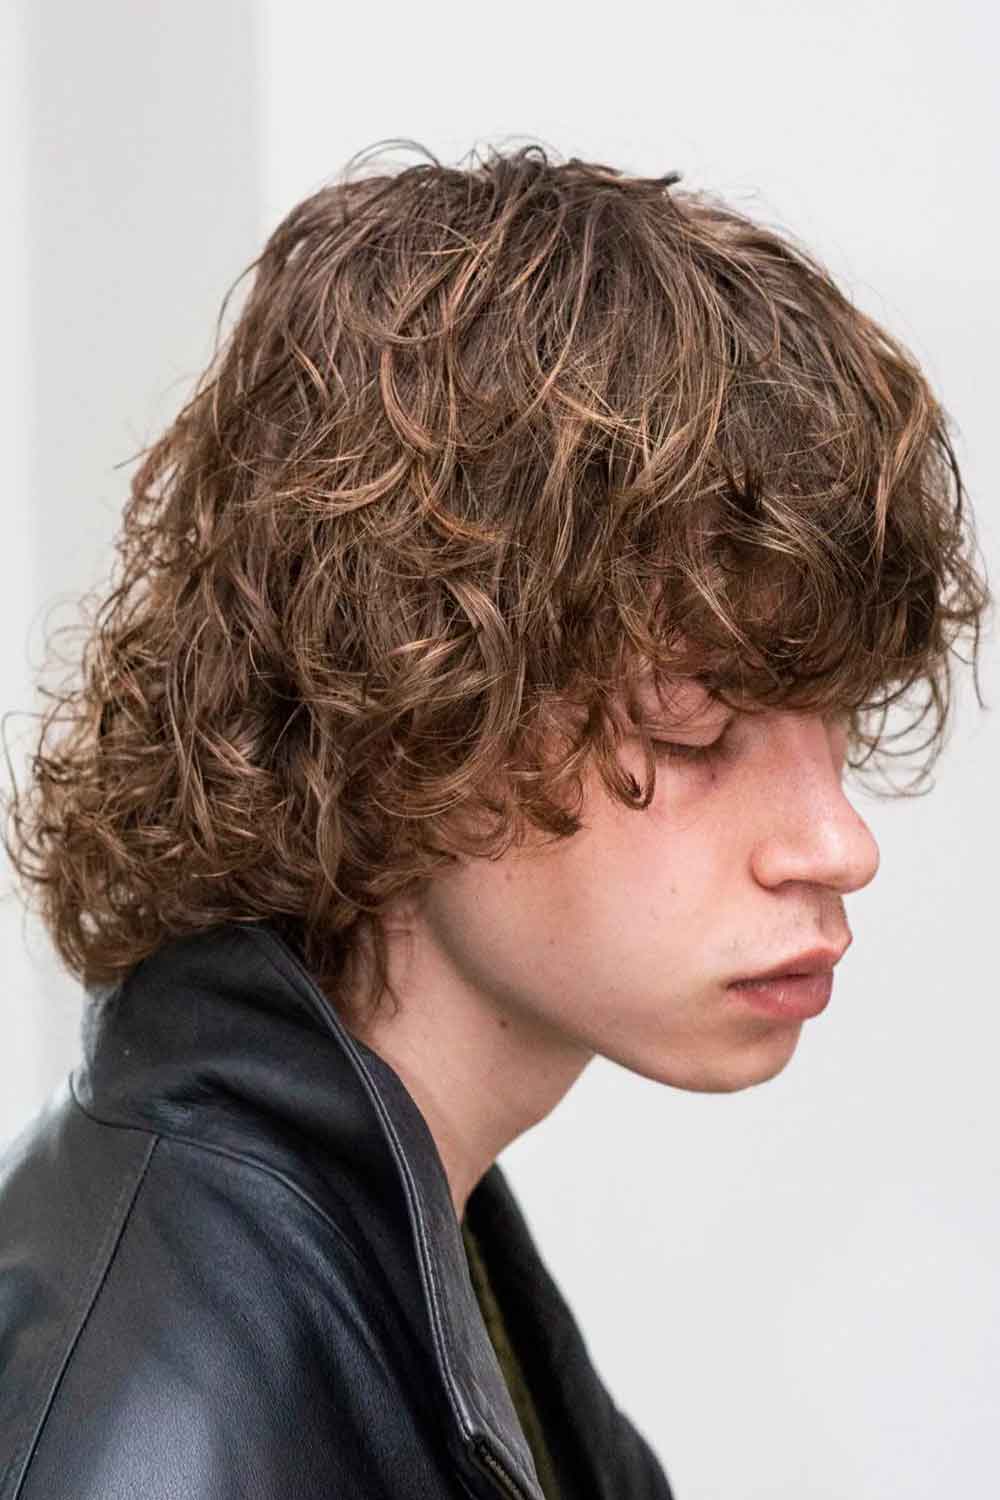 Are curly hair on men attractive? pics - The Student Room